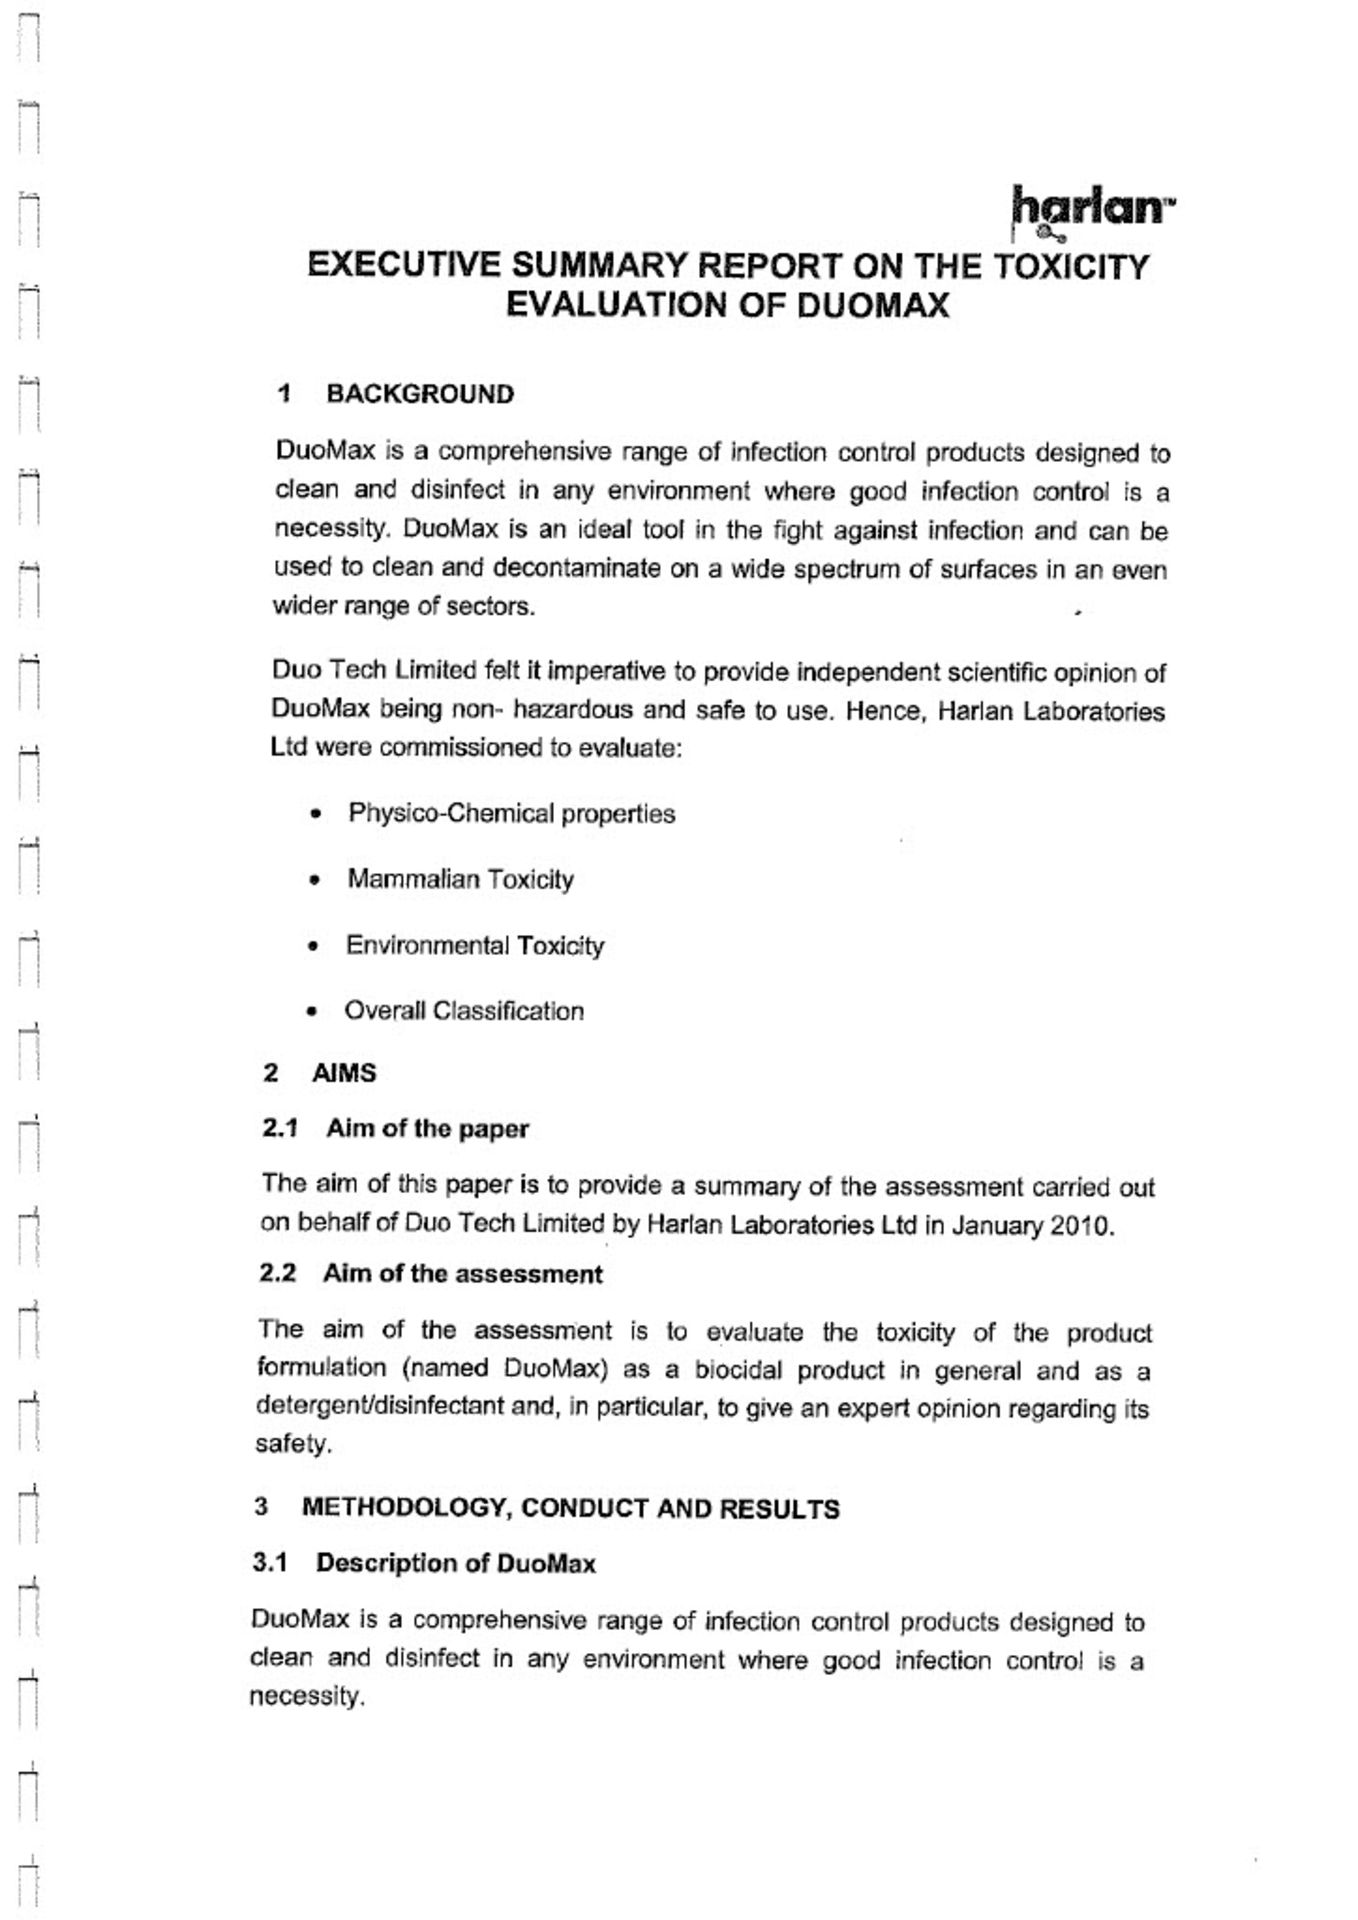 TANK OF DUOMAX SUPER CONCENTRATED DISINFECTANT, MADE IN UK, MARCH 2020, ALL DOCUMENTS ATTACHED - Image 59 of 75